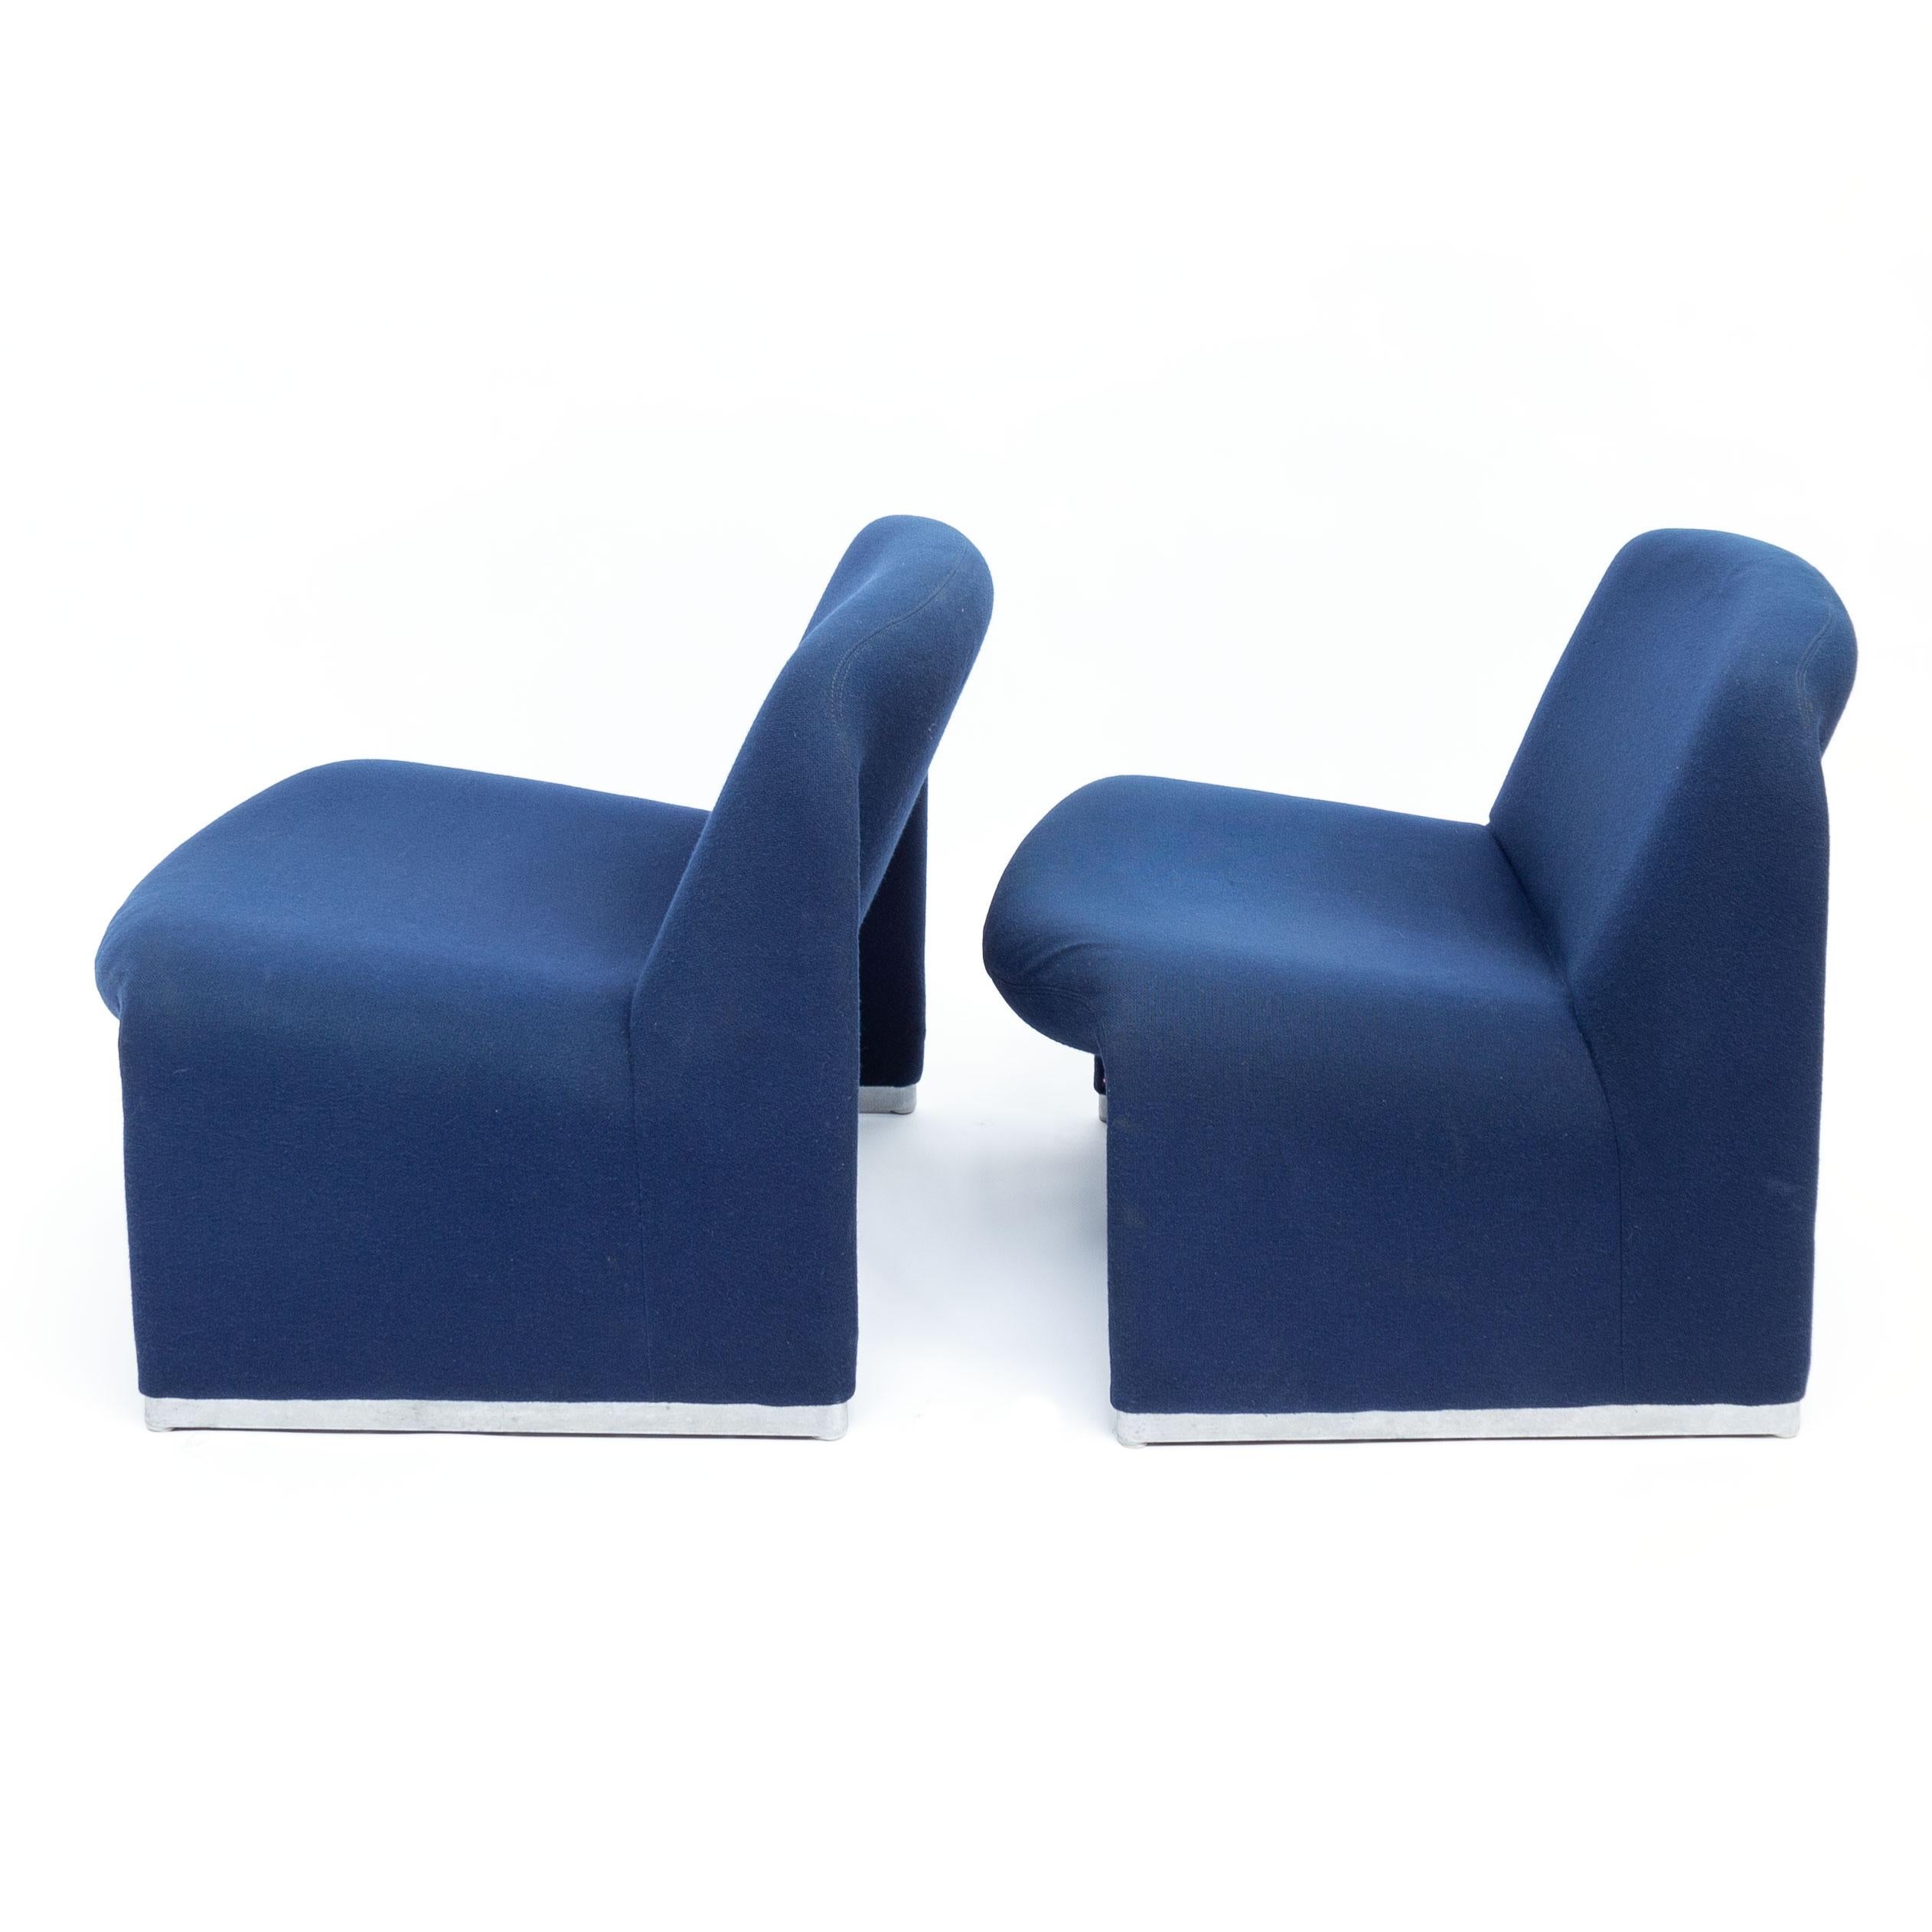 Alky chair designed by Giancarlo Piretti for Castelli. Very comfortable, in original blue Van Der Ploeg fabric. Its organic shape ensures a great comfort for a rather small chair! Two available, sold per item.

 